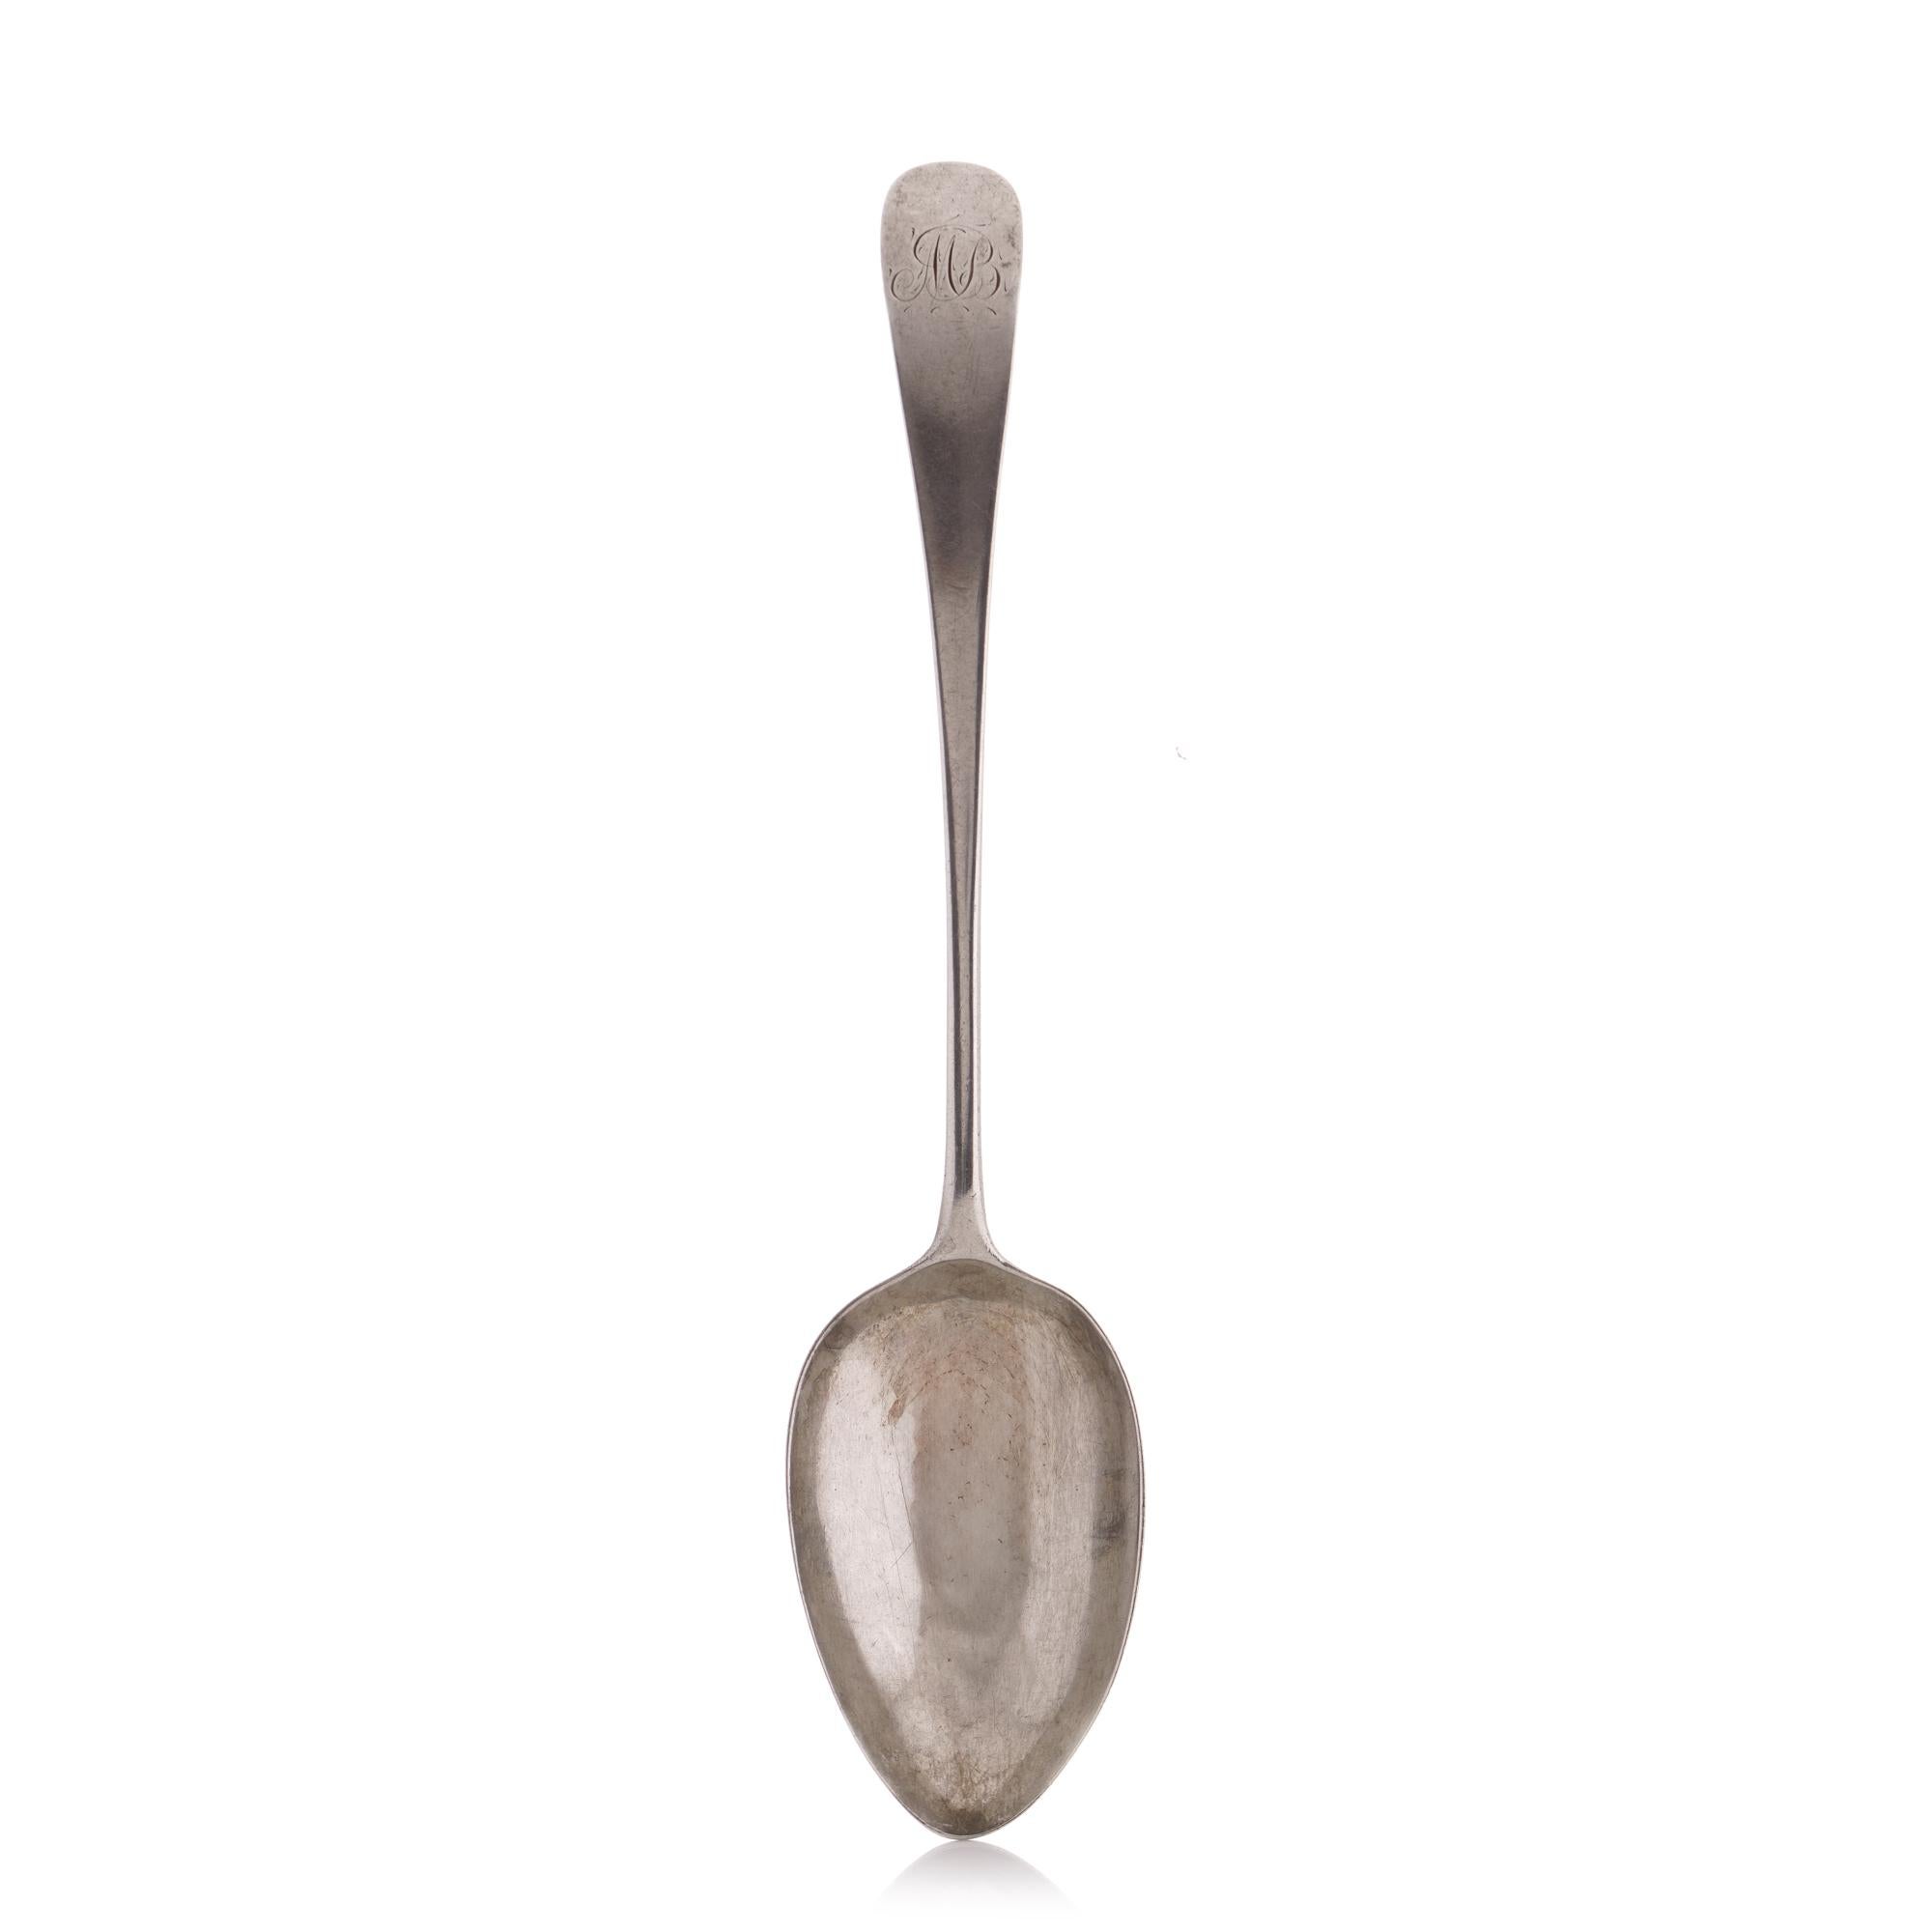 Antique Georgian sterling 925 silver large spoon. 
The spoon has a monogram ' MB ' 
Made in England, 1794 

The measurements:
Length x width x depth: 22.5 x 4.8 x 3.2 cm 
Weight:49 grams 

Condition: Spoon is pre-owned, with minor dings, and minor